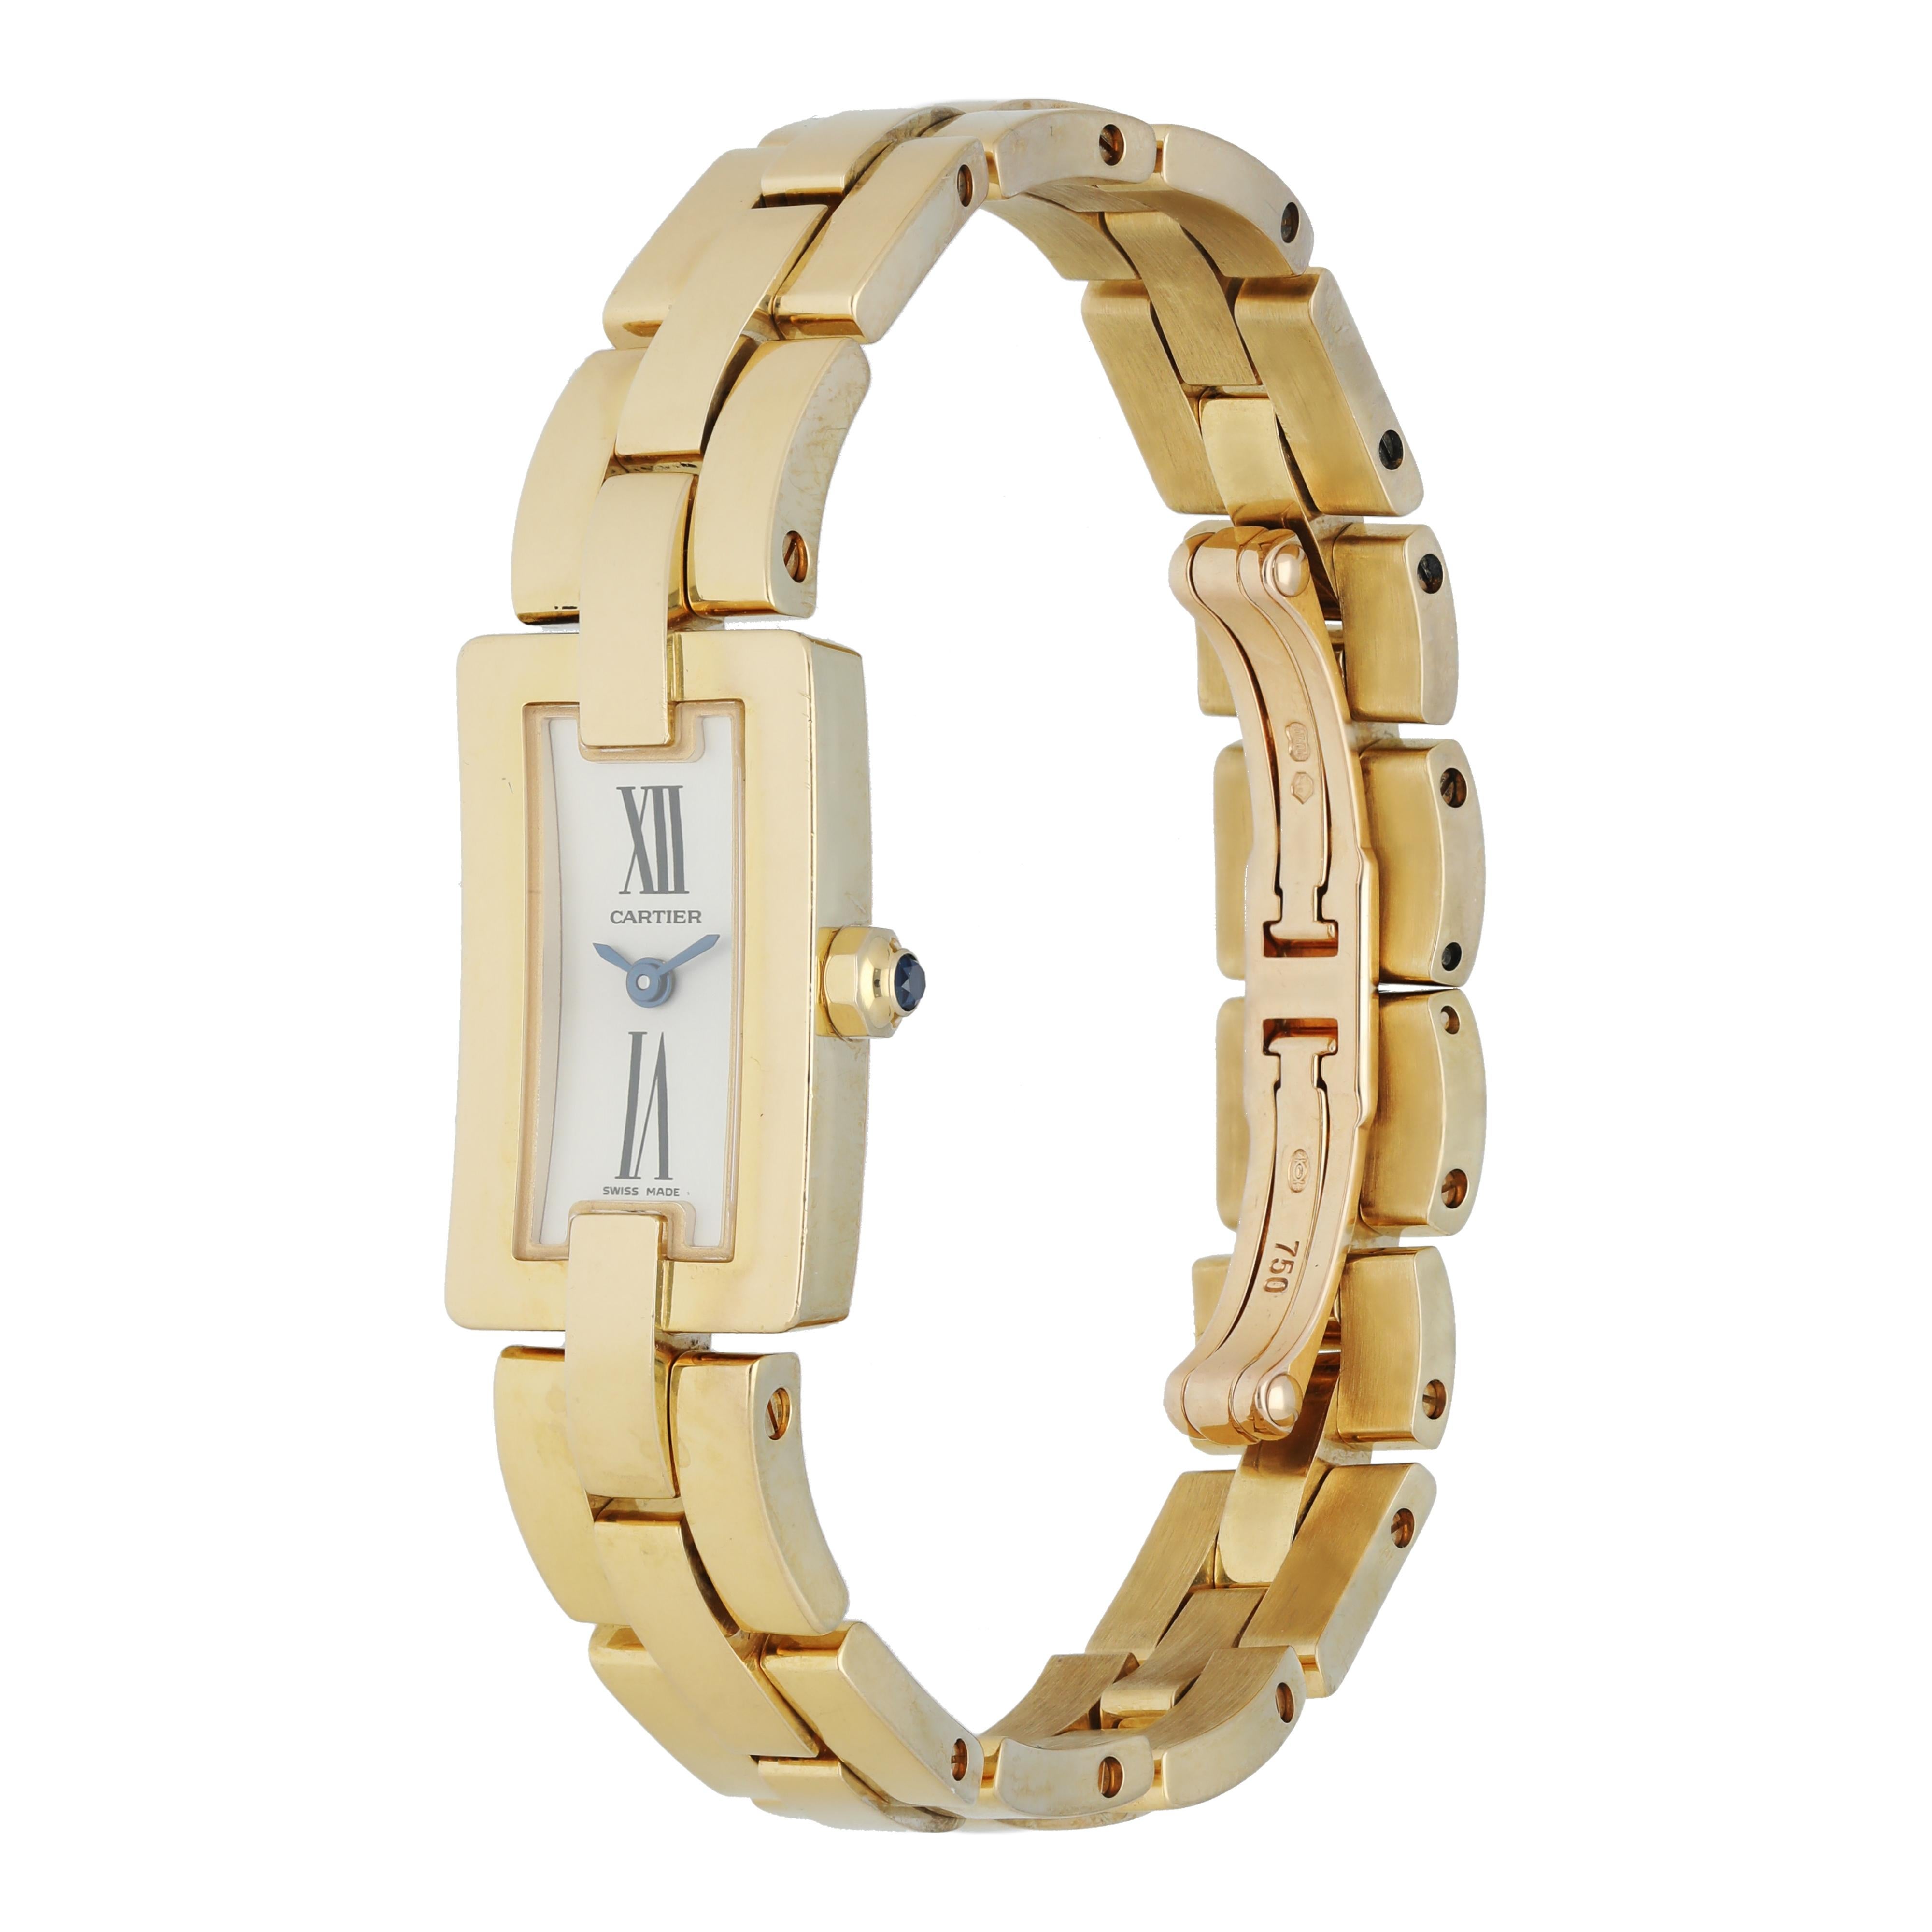 Cartier Ballerine 2992 Ladies Watch. 
14mm 18k Yellow gold case. 
Yellow Gold smooth bezel. 
Grey dial with blue steel hands.
Yellow Gold Bracelet with Butterfly Clasp. 
Will fit up to a 6.25-inch wrist. 
Saphire Crystal, yellow gold case back. 